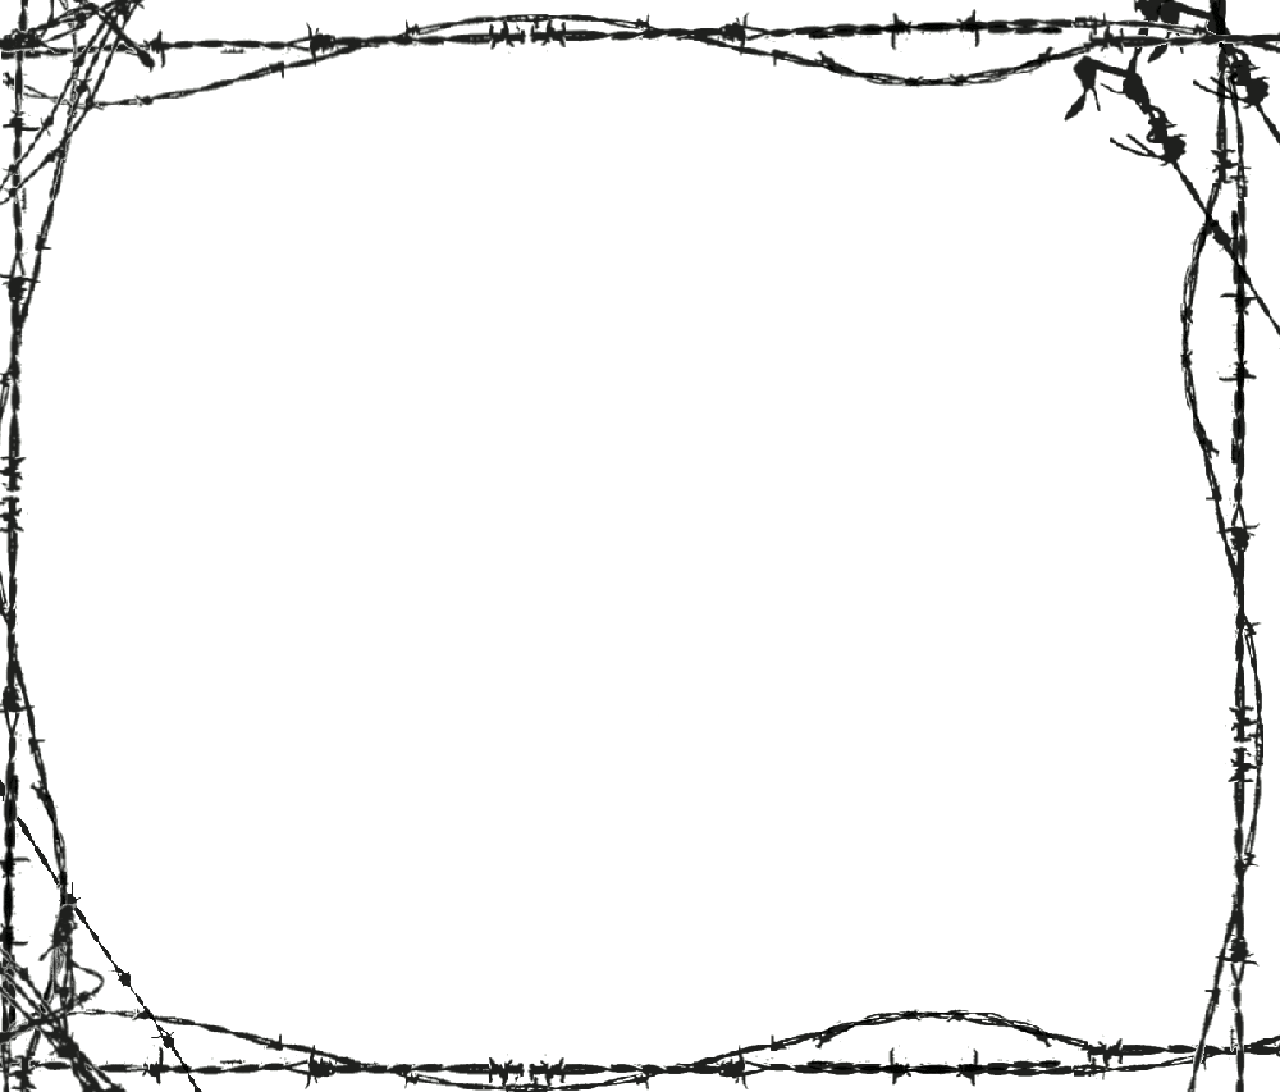 Barbed Wire Clipart Border - Barbed Wire Border, Transparent background PNG HD thumbnail